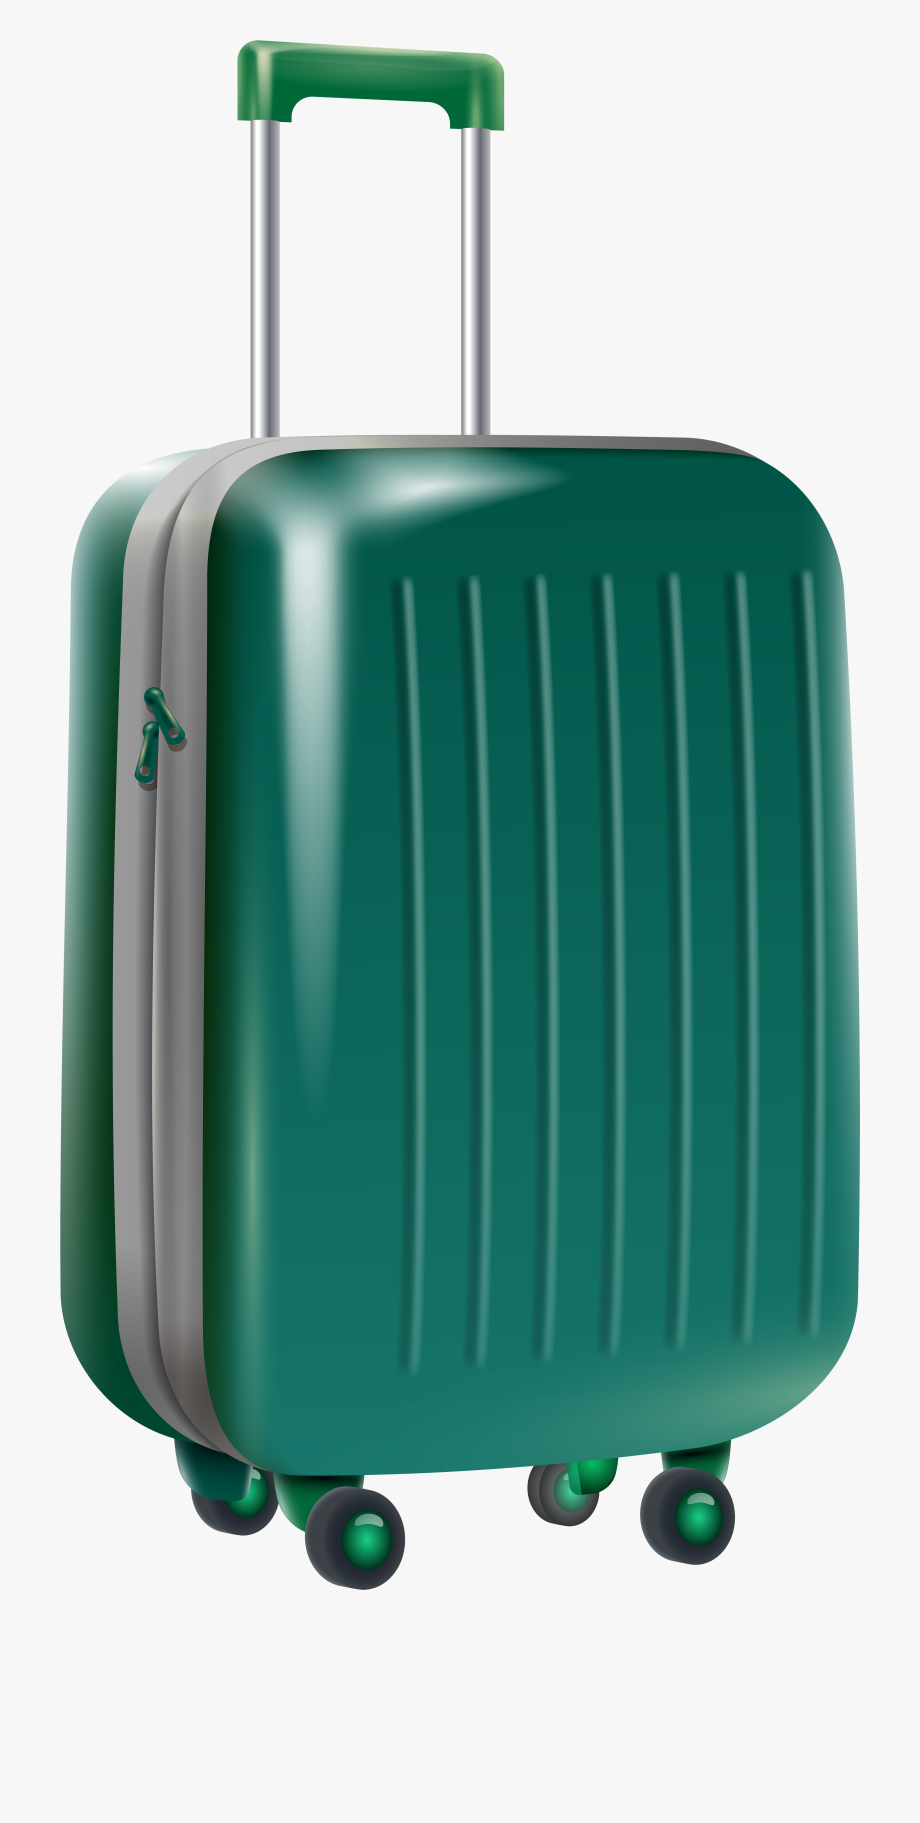 Luggage clipart trolly bag. Green suitcase transparent trolley